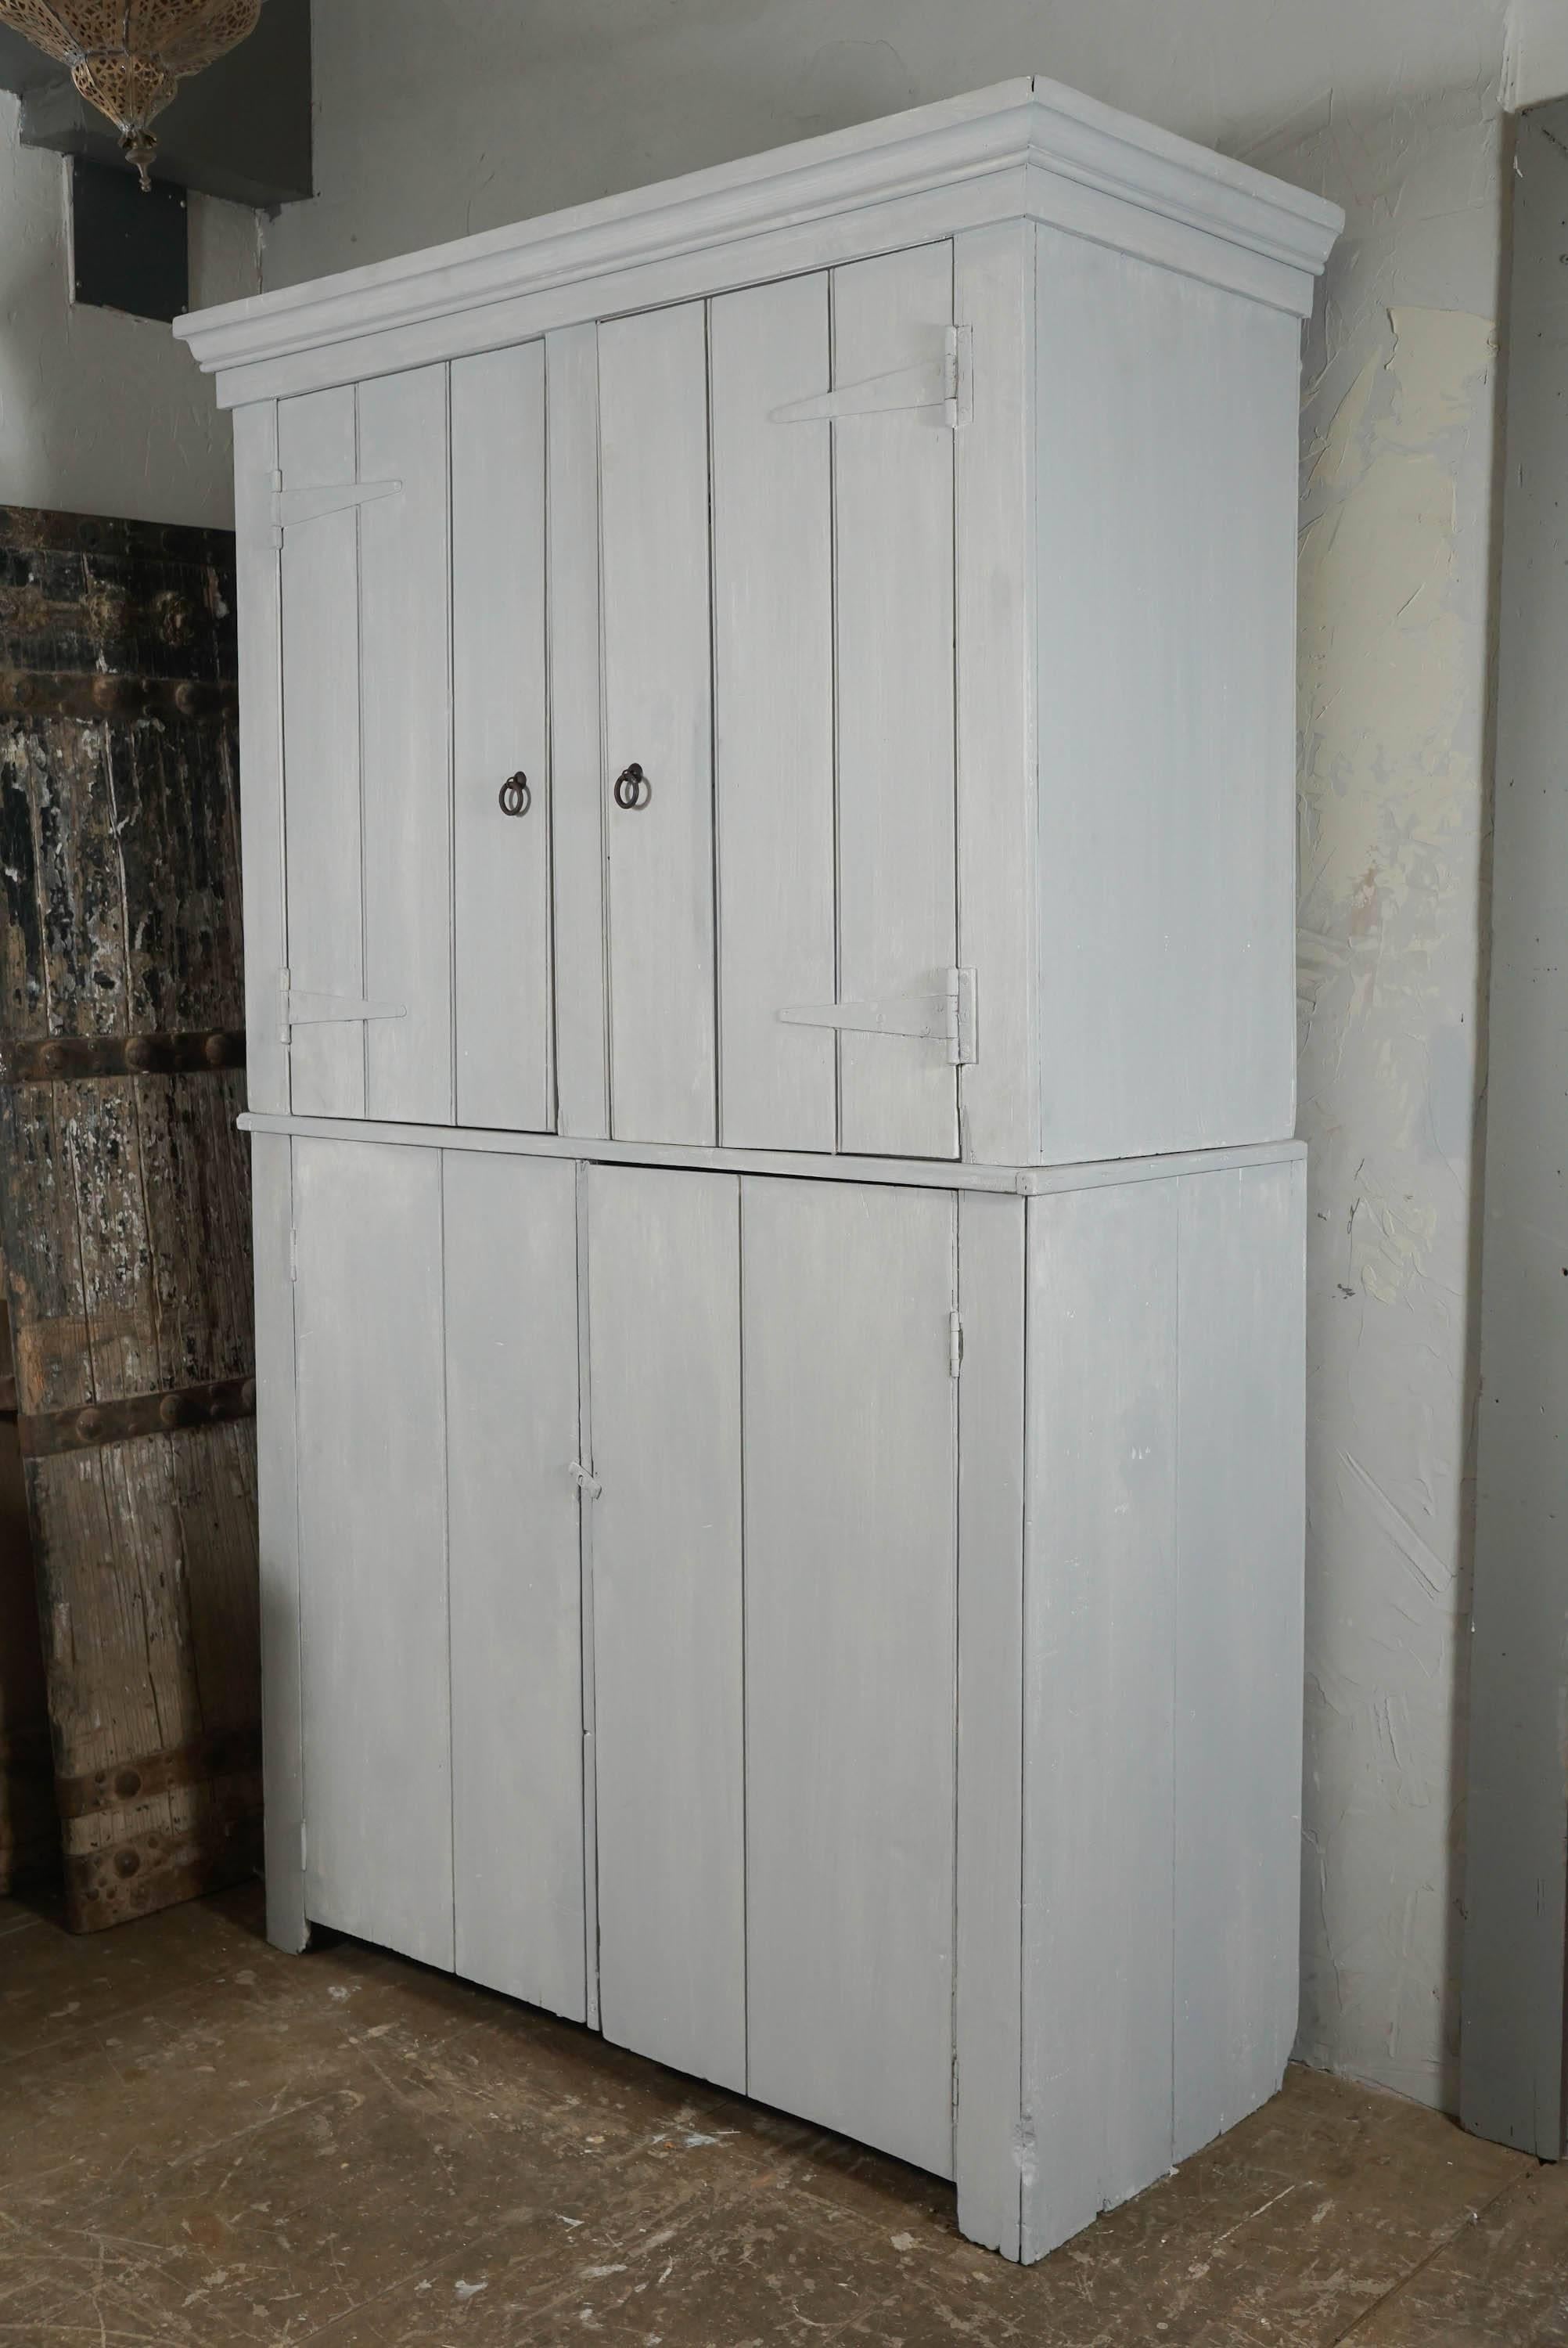 The capacious pale grey 19th century cupboard is constructed of separate top and bottom parts. The upper part has paneled double doors with wrought iron ring pulls and decorative hinges. Inside are two full shelves alternating with two half-depth